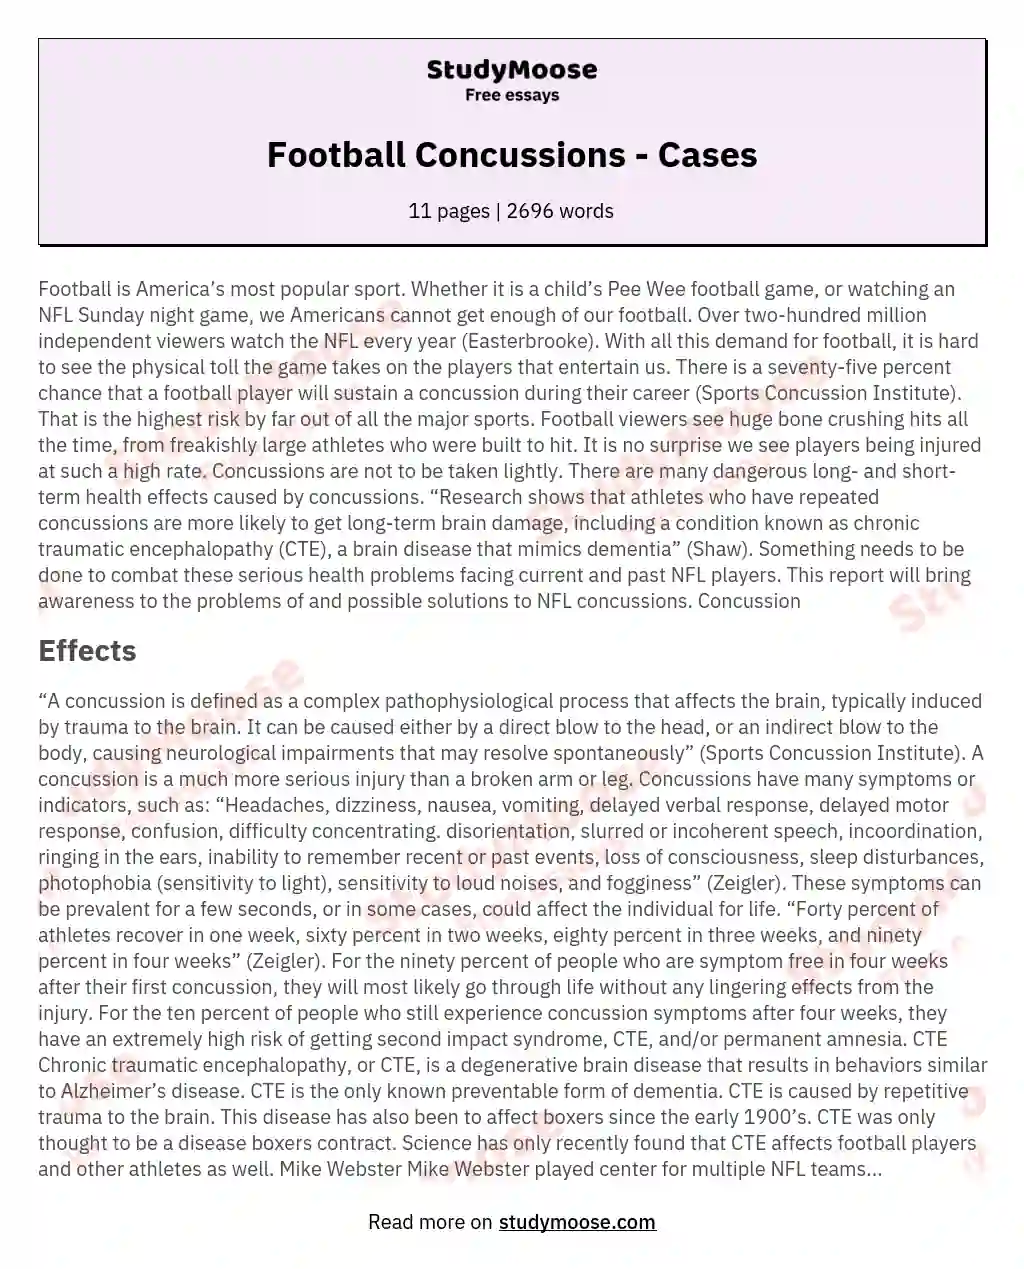 Football Concussions - Cases